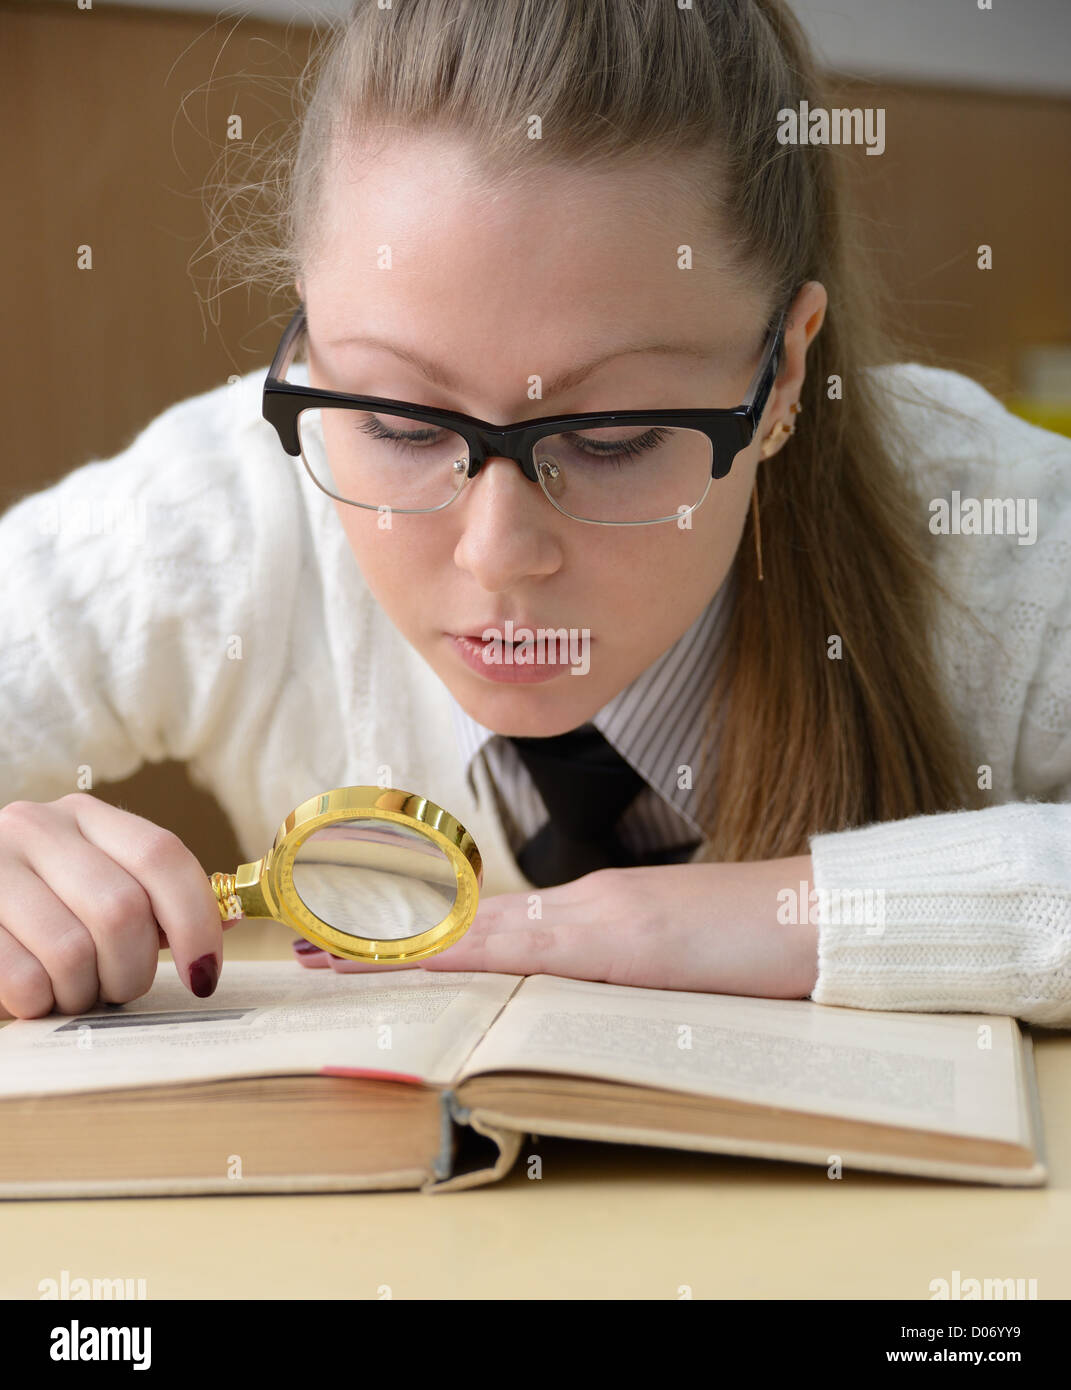 woman reading a book with a magnifying glass Stock Photo